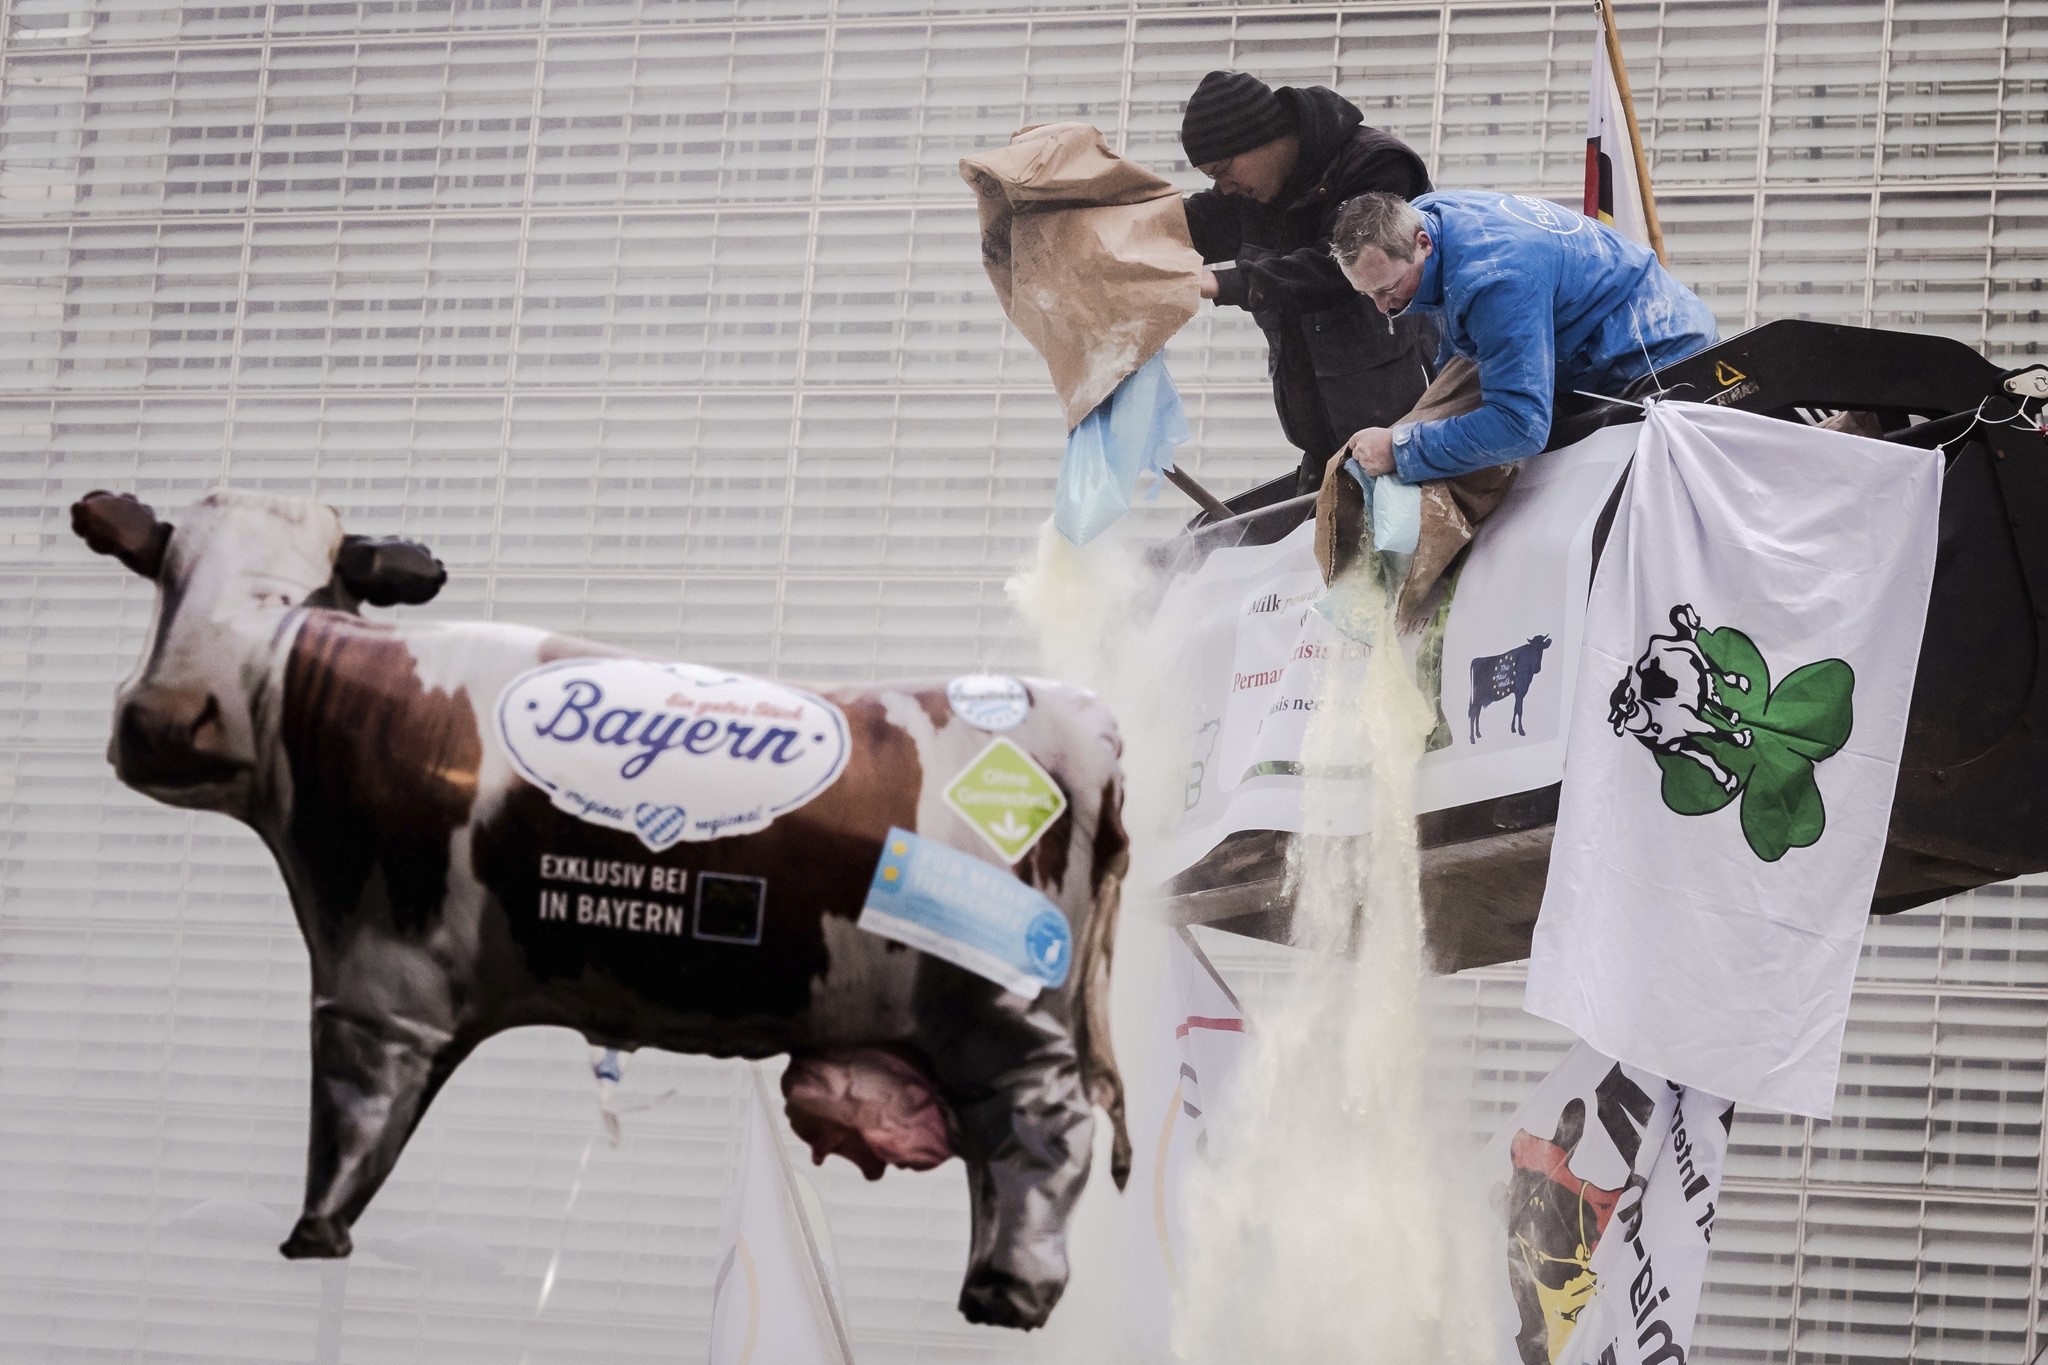 European dairy farmers spray the EU Council building with milk powder to protest the crisis in their sector, in Brussels on Monday, Jan. 23, 2017. (AP Photo)